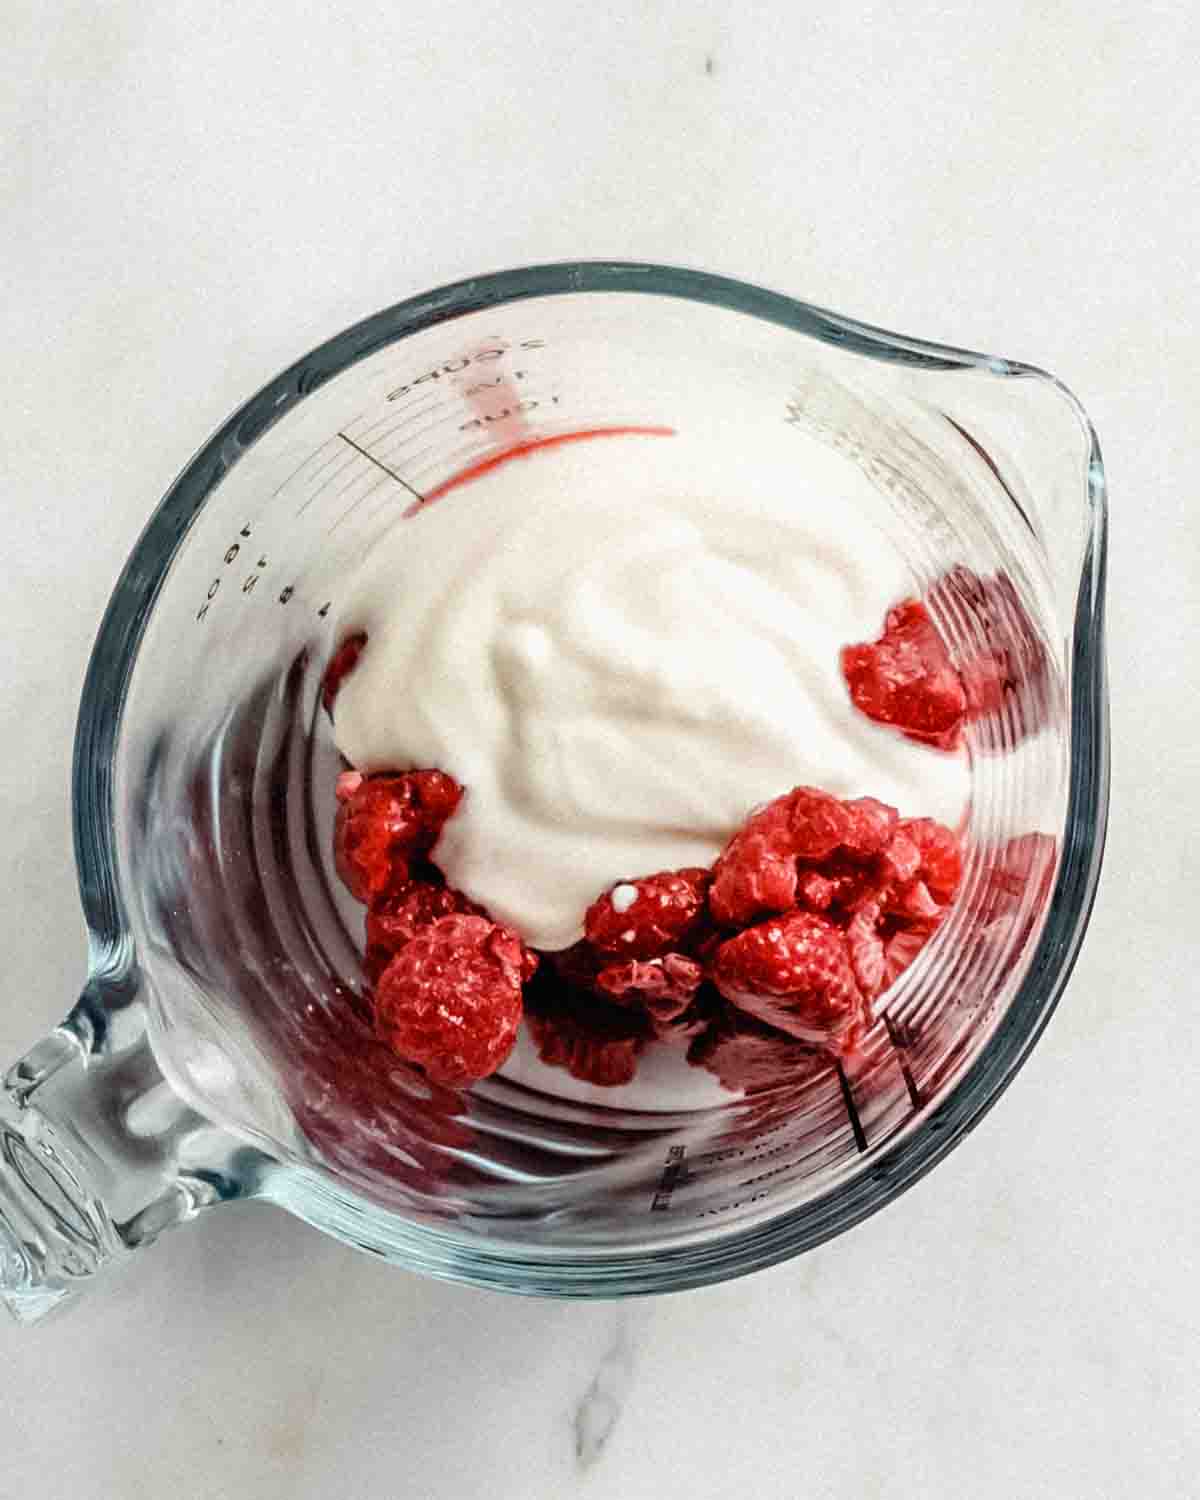 defrosted raspberries and yogurt in a glass measuring cup.